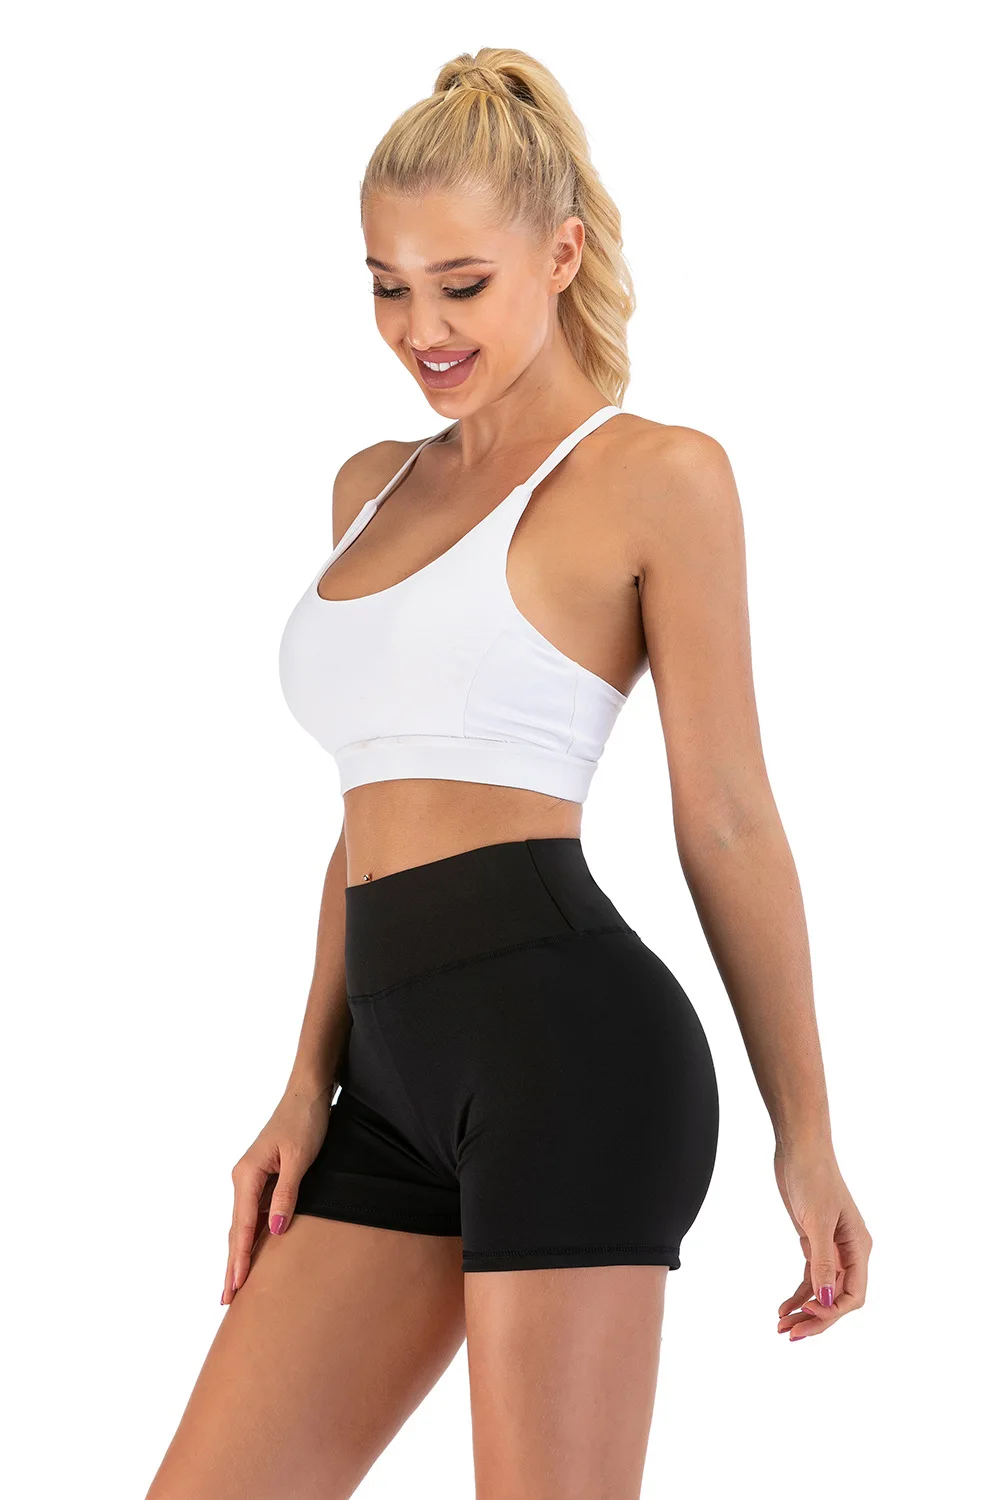 H72909538c7b94762bed506f674688e5eB - Gym High Waisted Shorts Wholesale - Custom Fitness Apparel Manufacturer